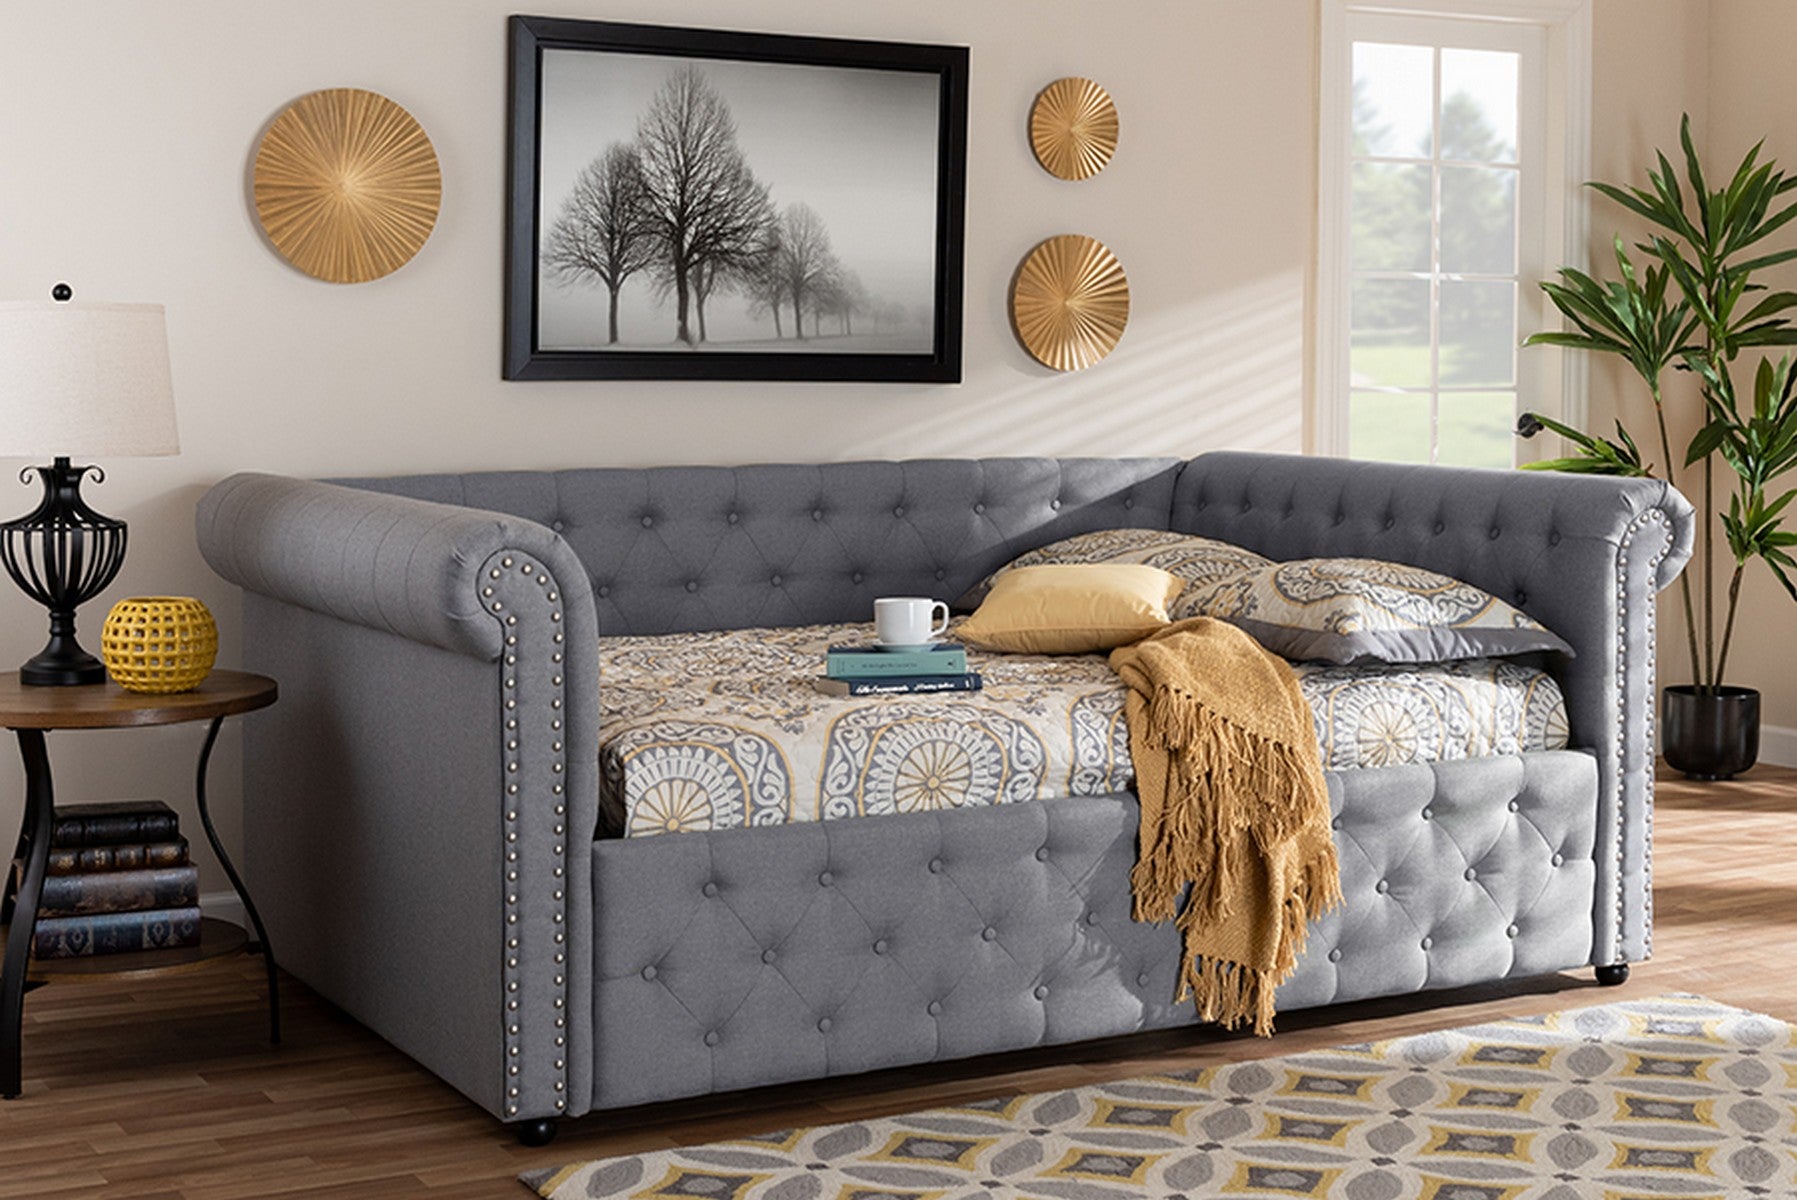 Baxton Studio Mabelle Modern and Contemporary Gray Fabric Upholstered Full Size Daybed